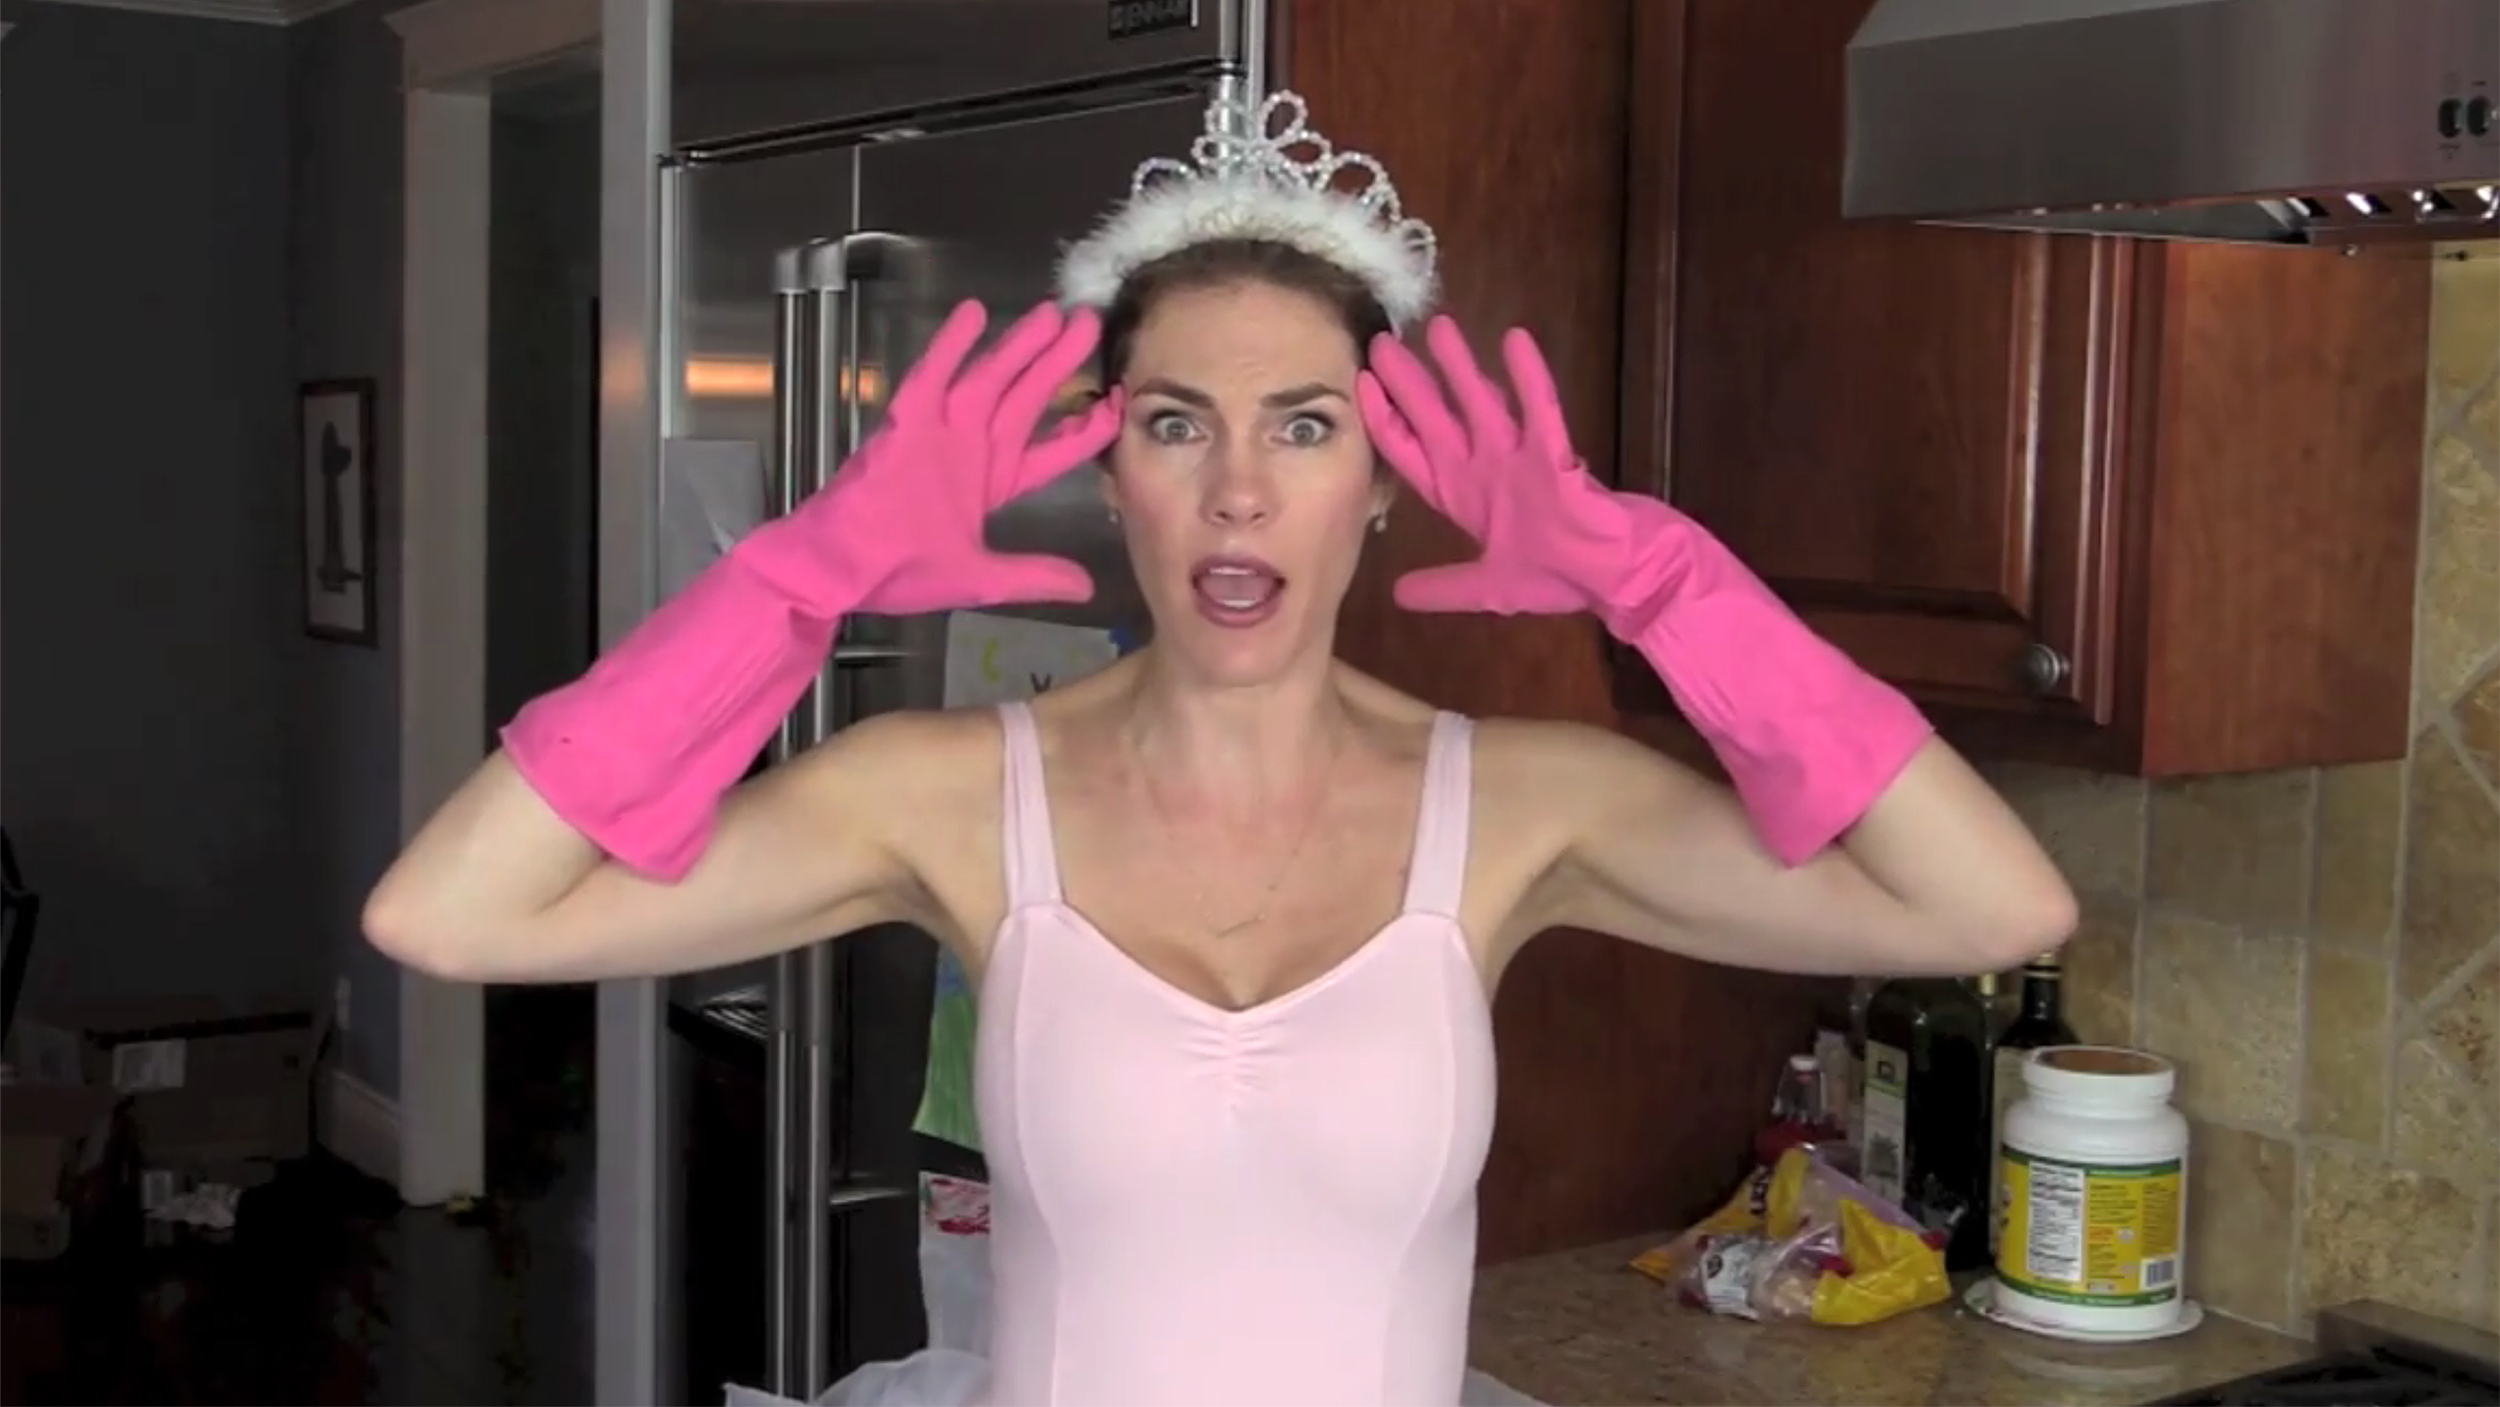 Mom parodies Taylor Swift hit with funny 'Knock it off' video